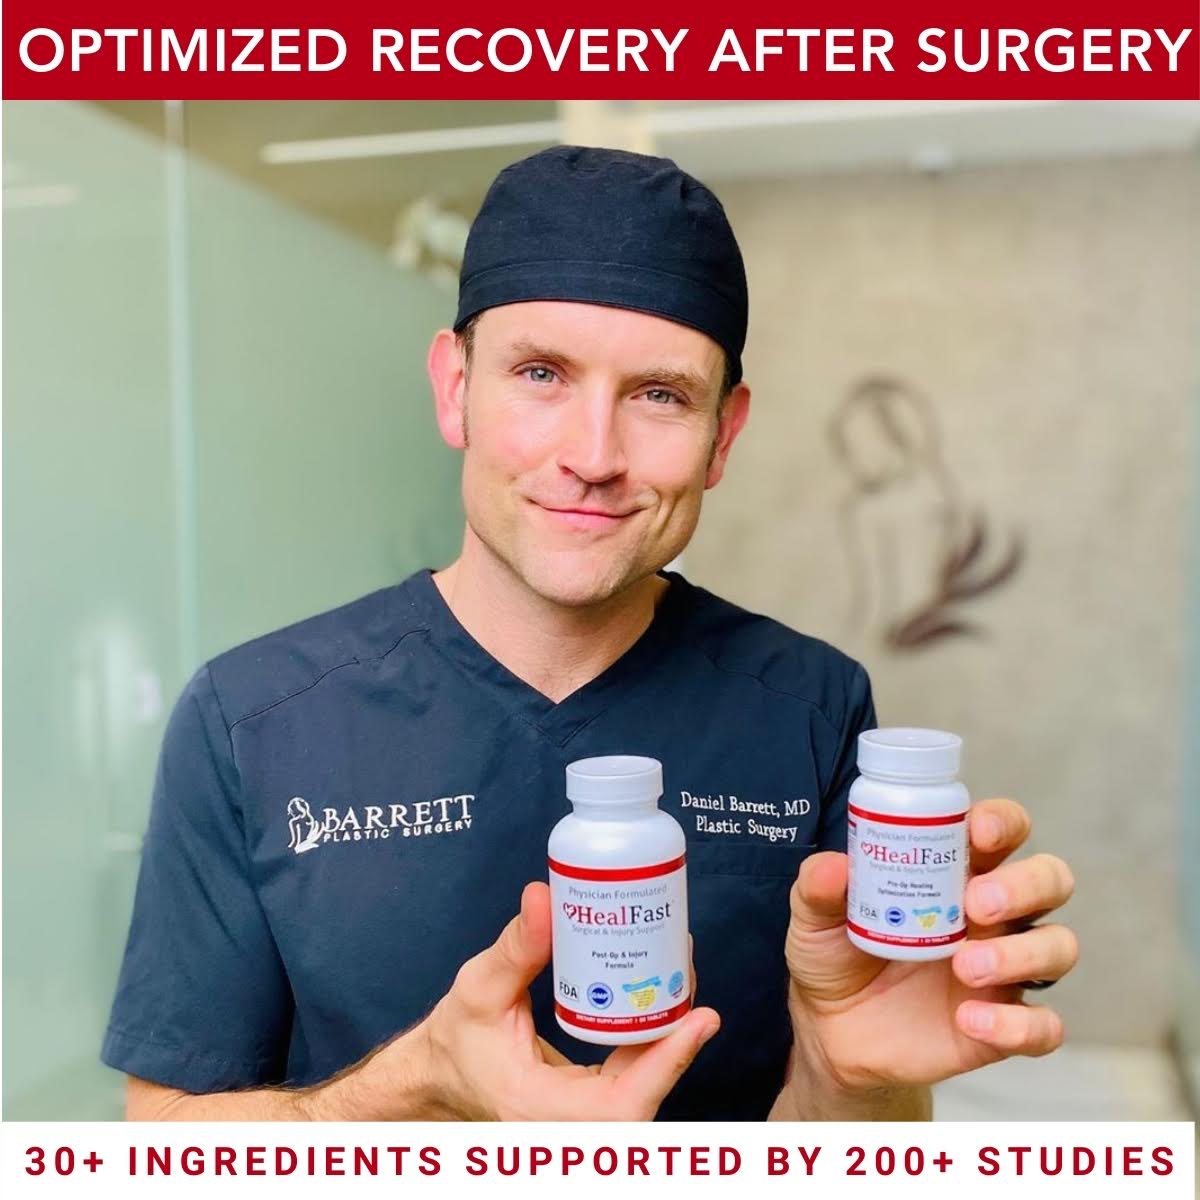 HealFast Nutrition for Pre-Surgery and Injury